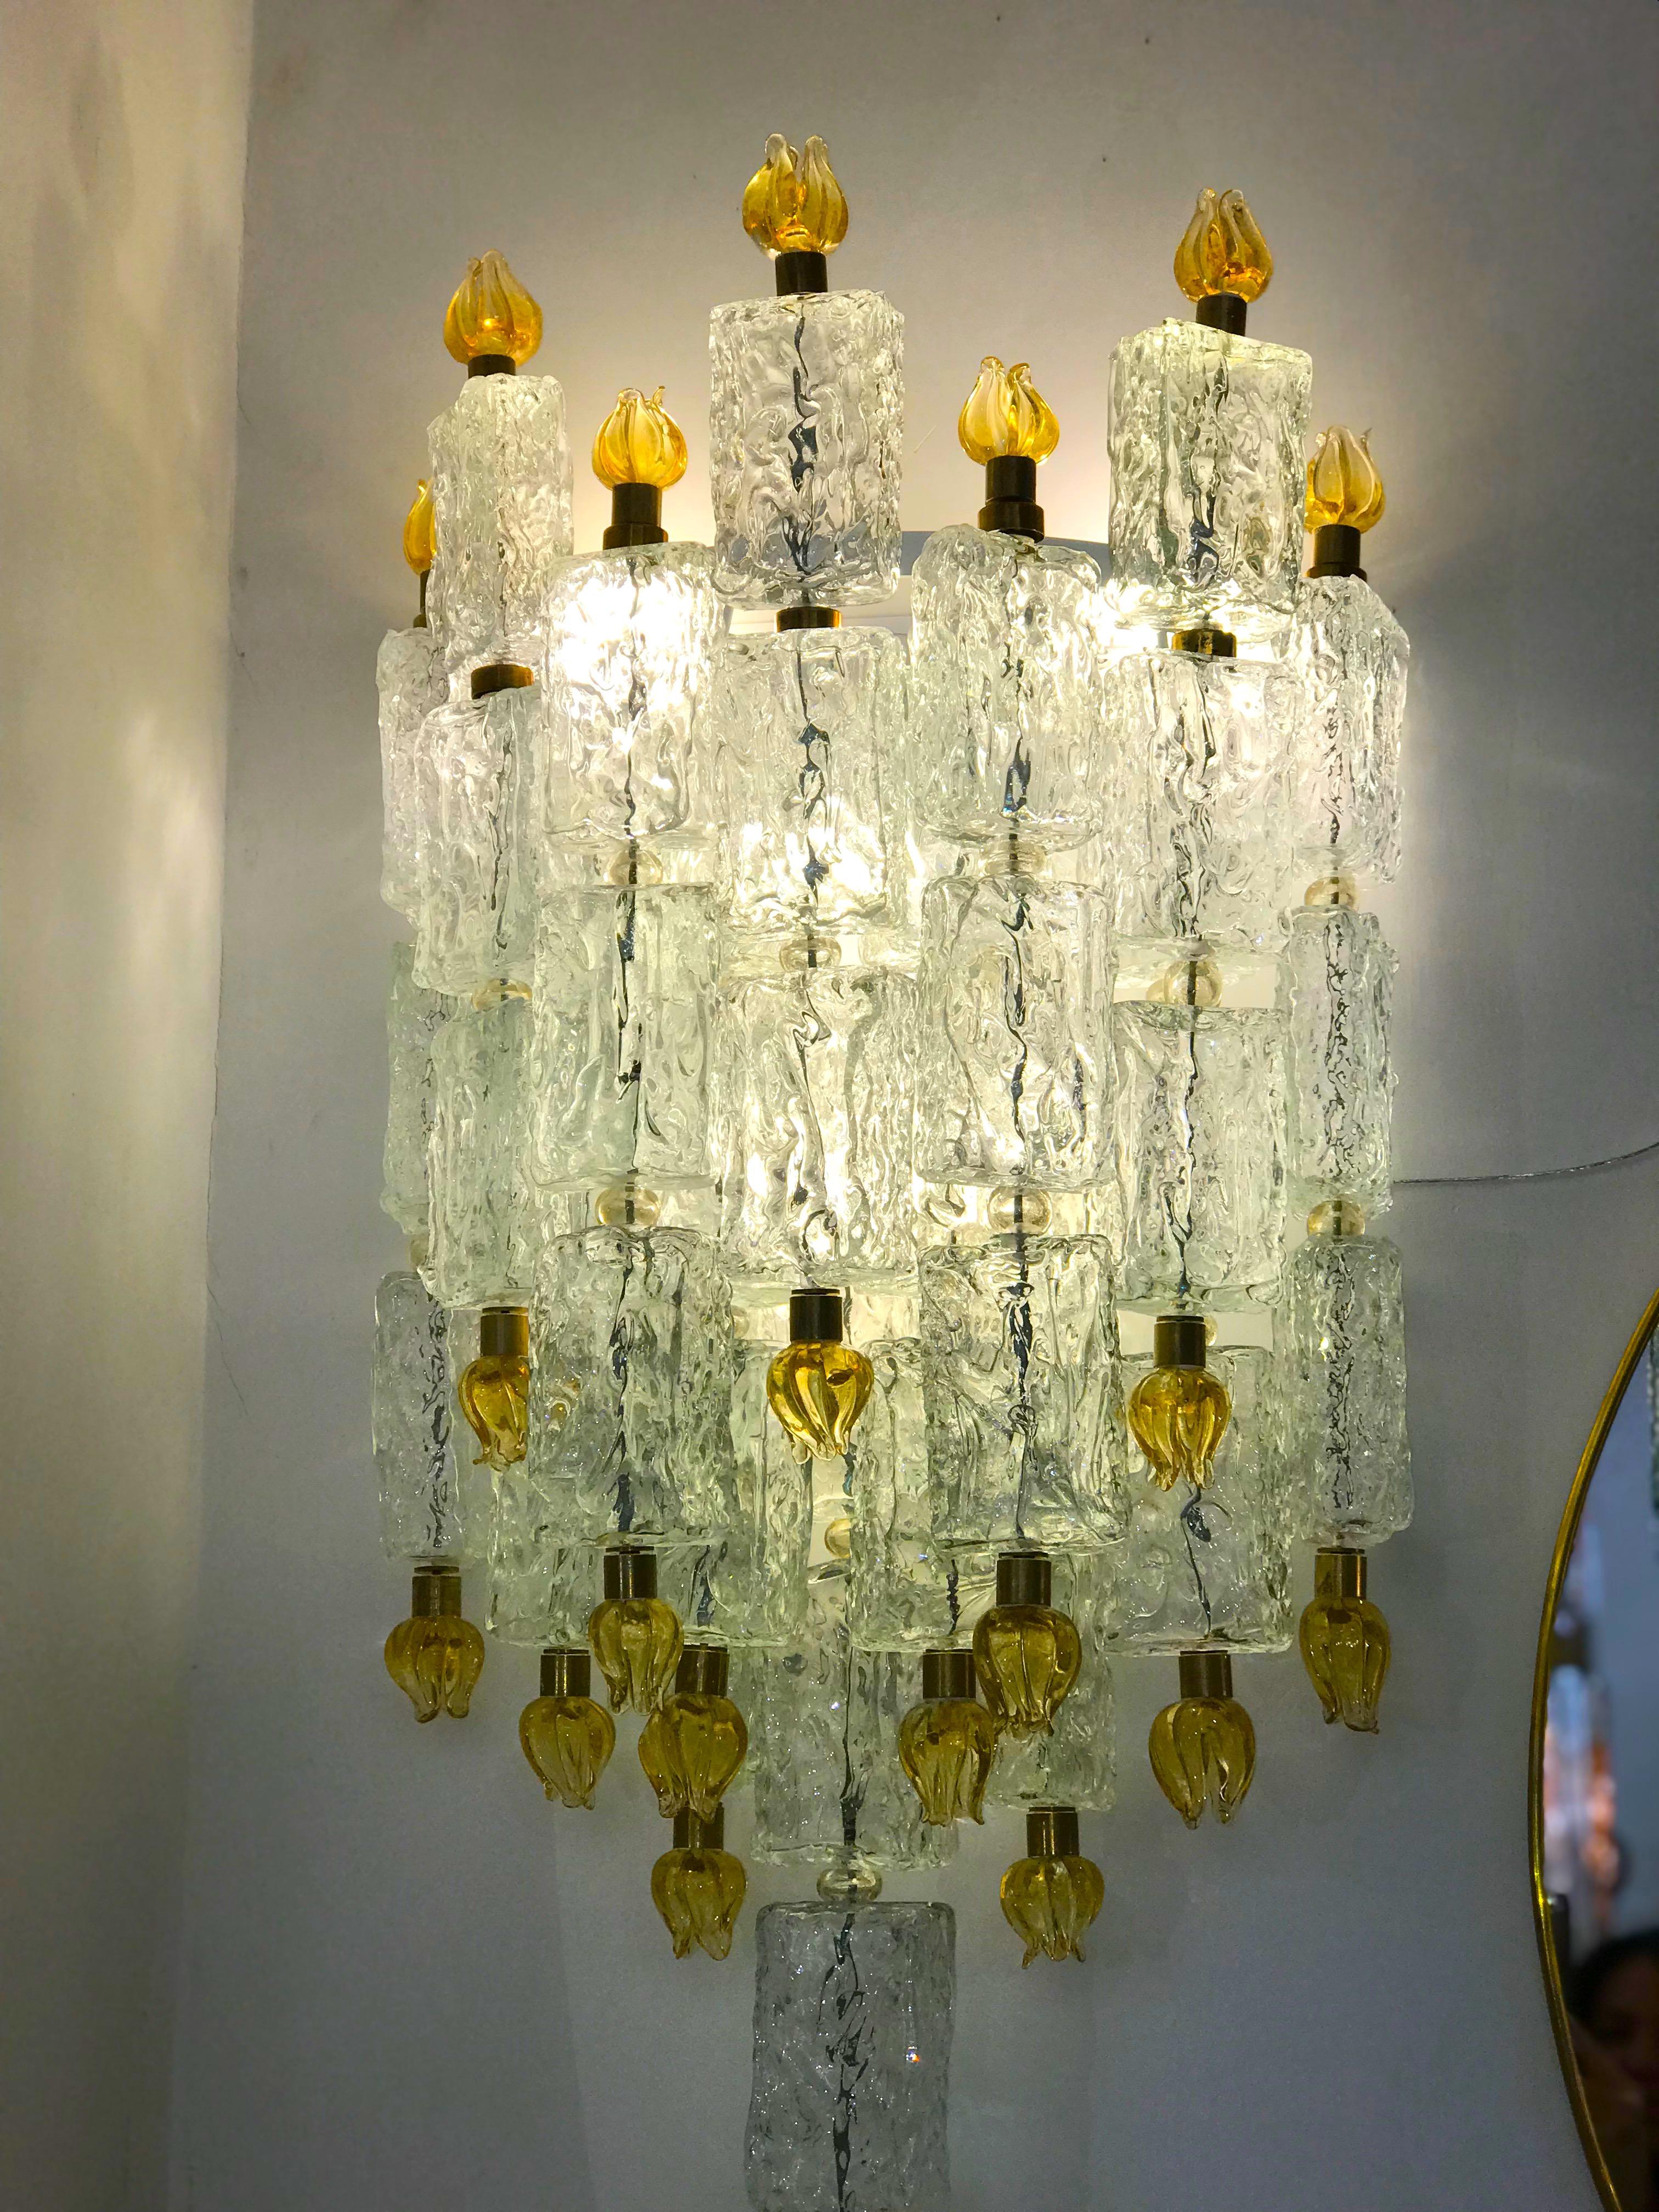 Outstanding pair of Barovier sconces with glass blocks ending with delicious hand blown gold tulips.
We have 2 pairs and available also a magnificent chandelier from the same provenance.
Provenance from a Luxurious Tuscany Hotel.

 